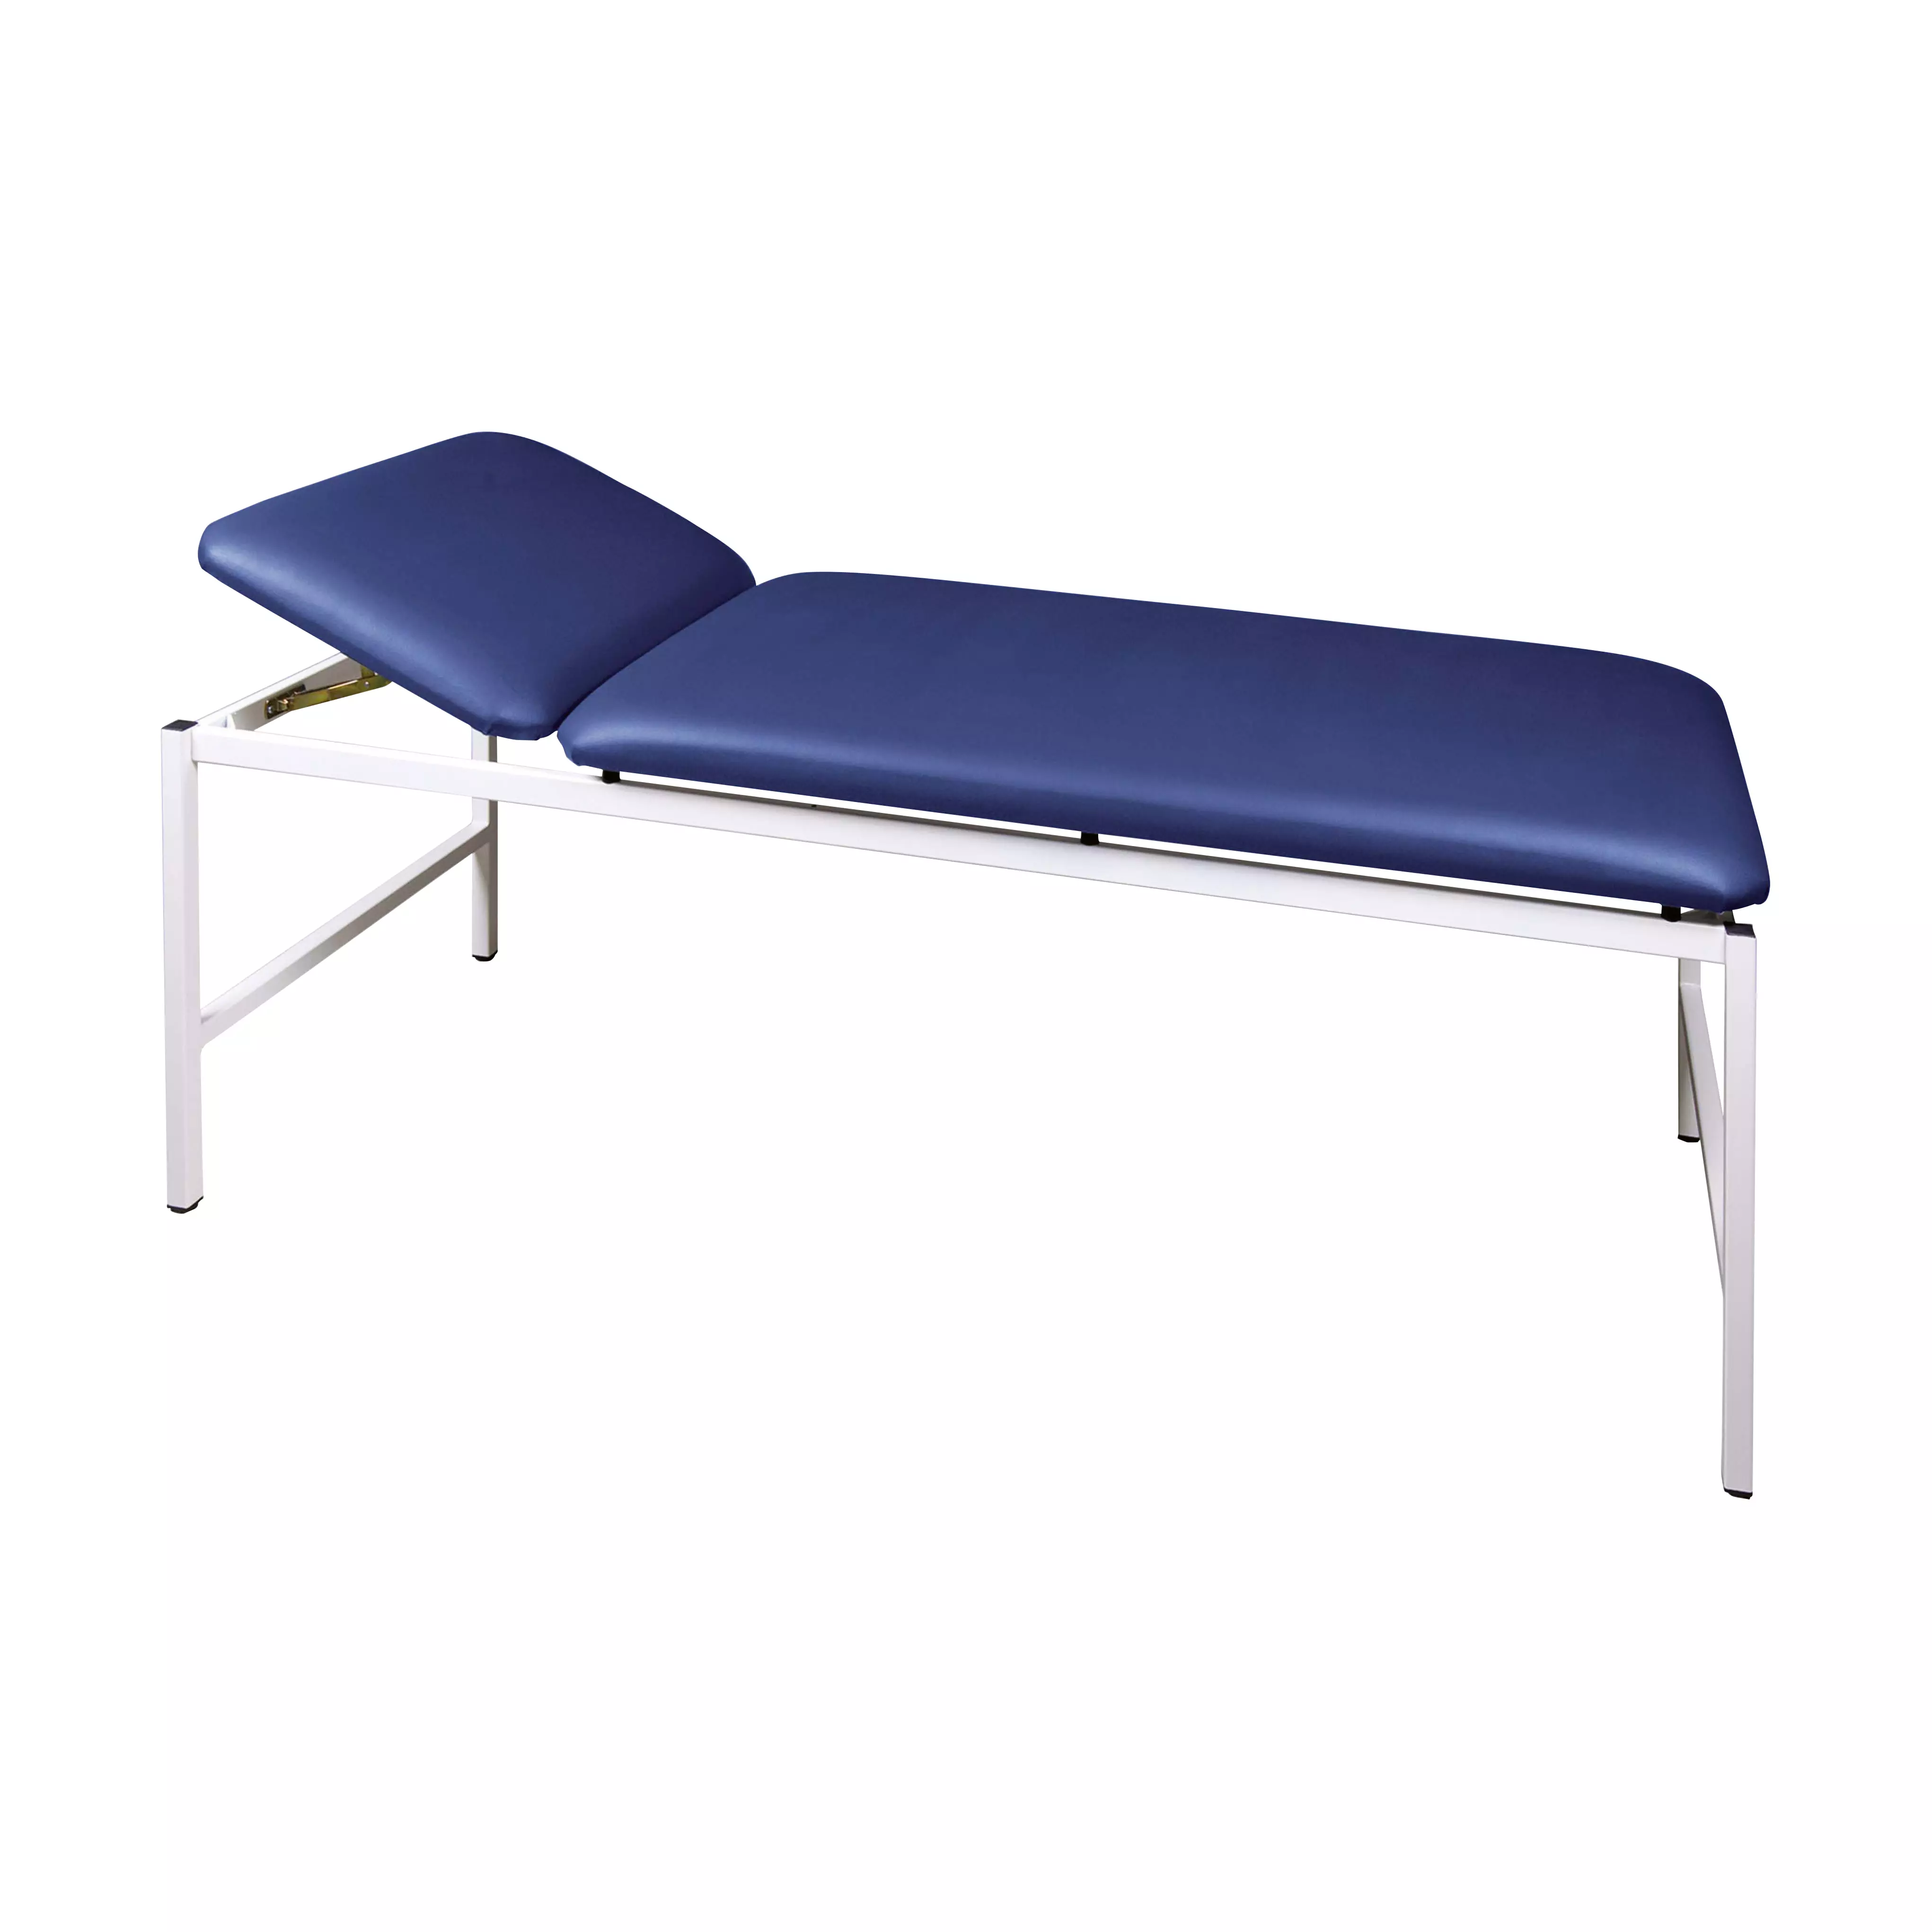 Examination and massage table model 200 - Blue